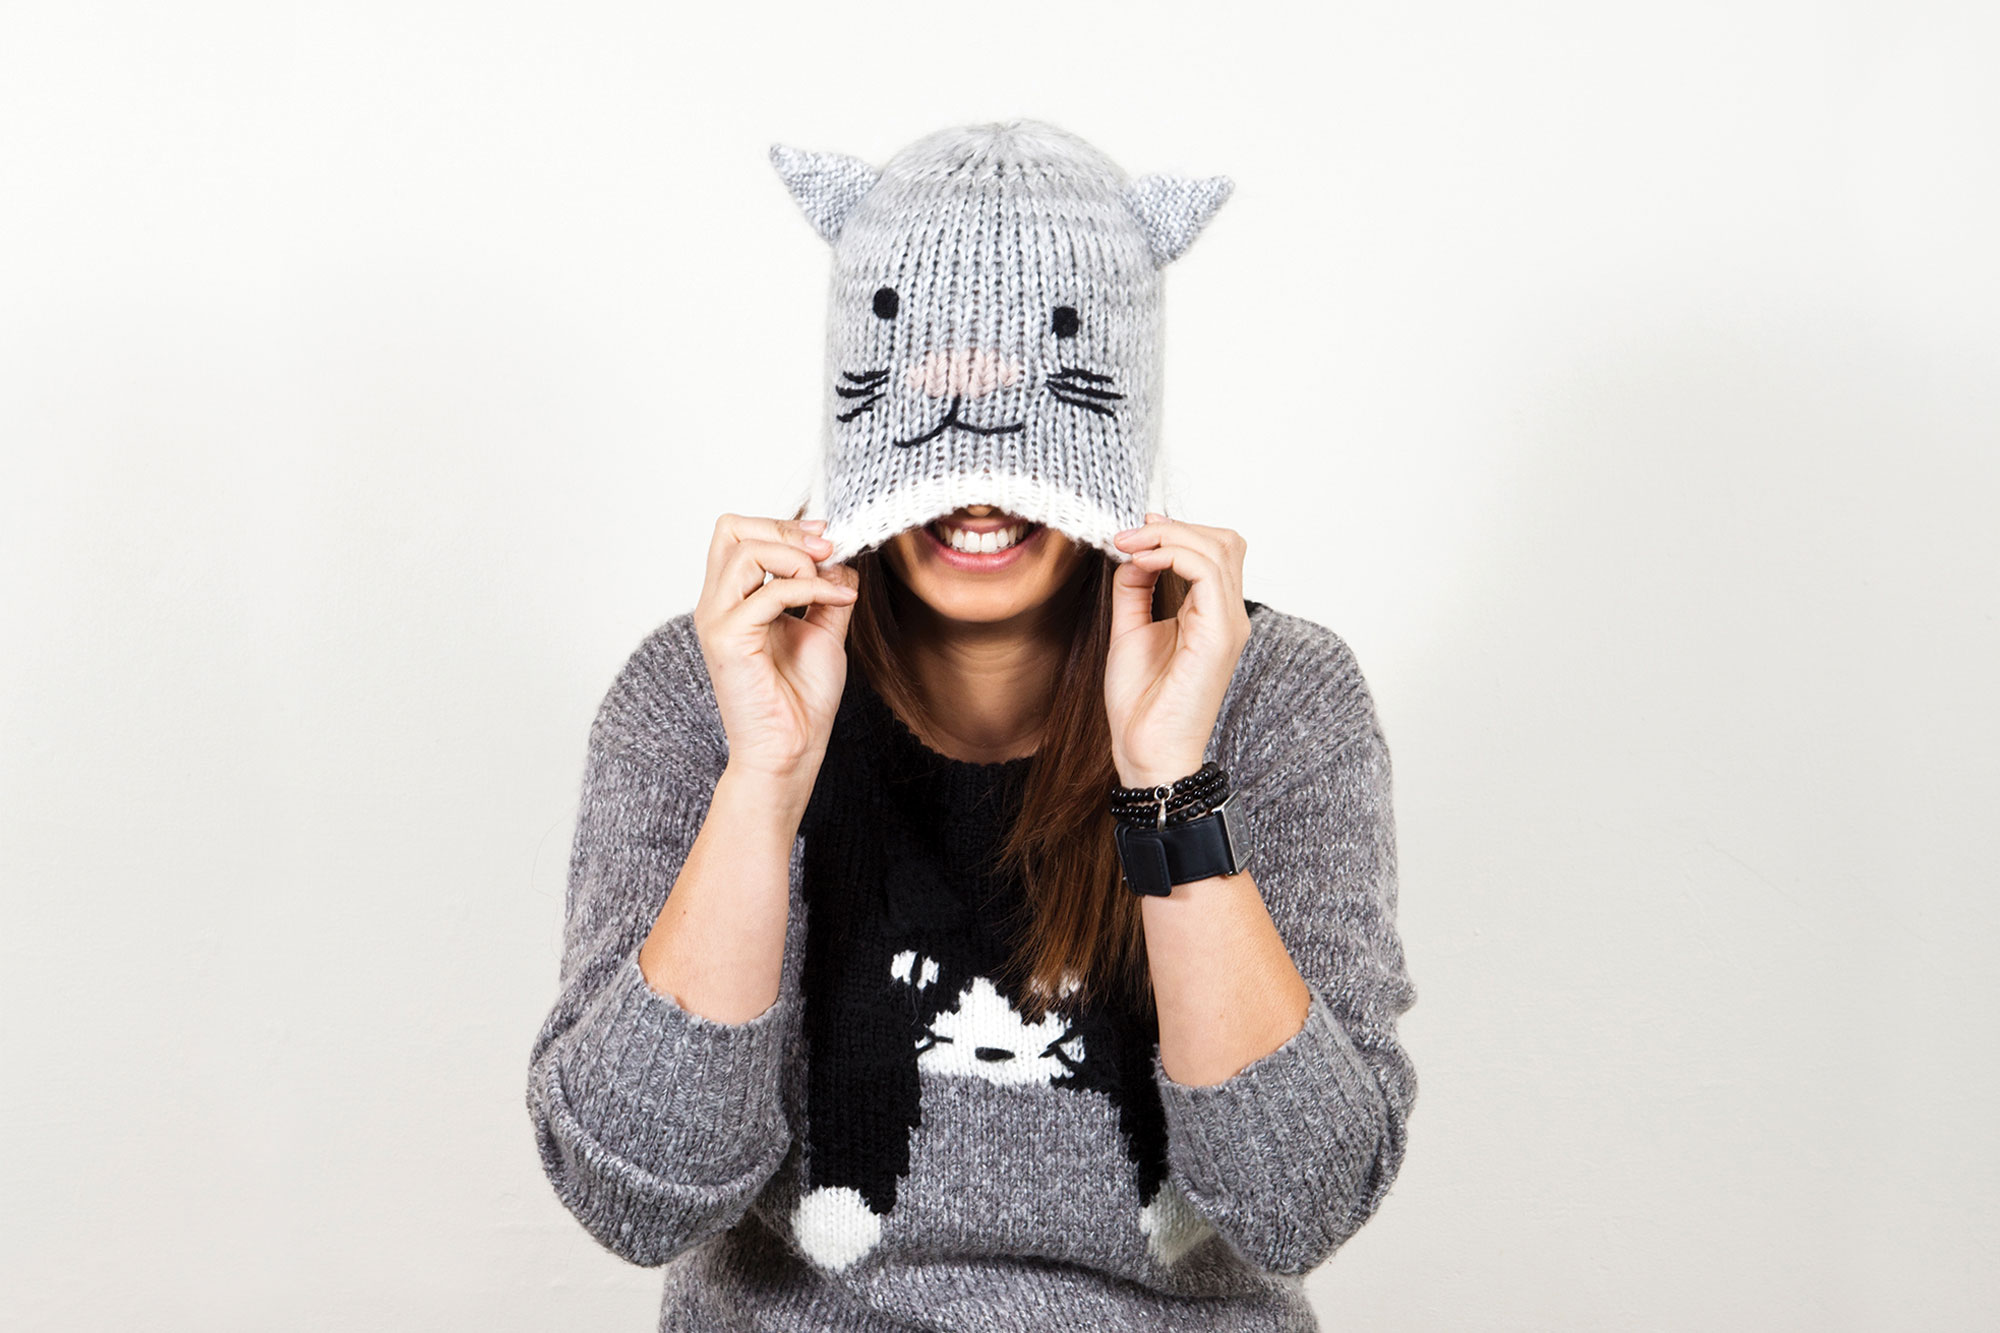 Kylie, wearing a grey sweater with a cat image down the front, and a light grey cat shaped beanie pulled over her eyes with her hands. She is grinning.